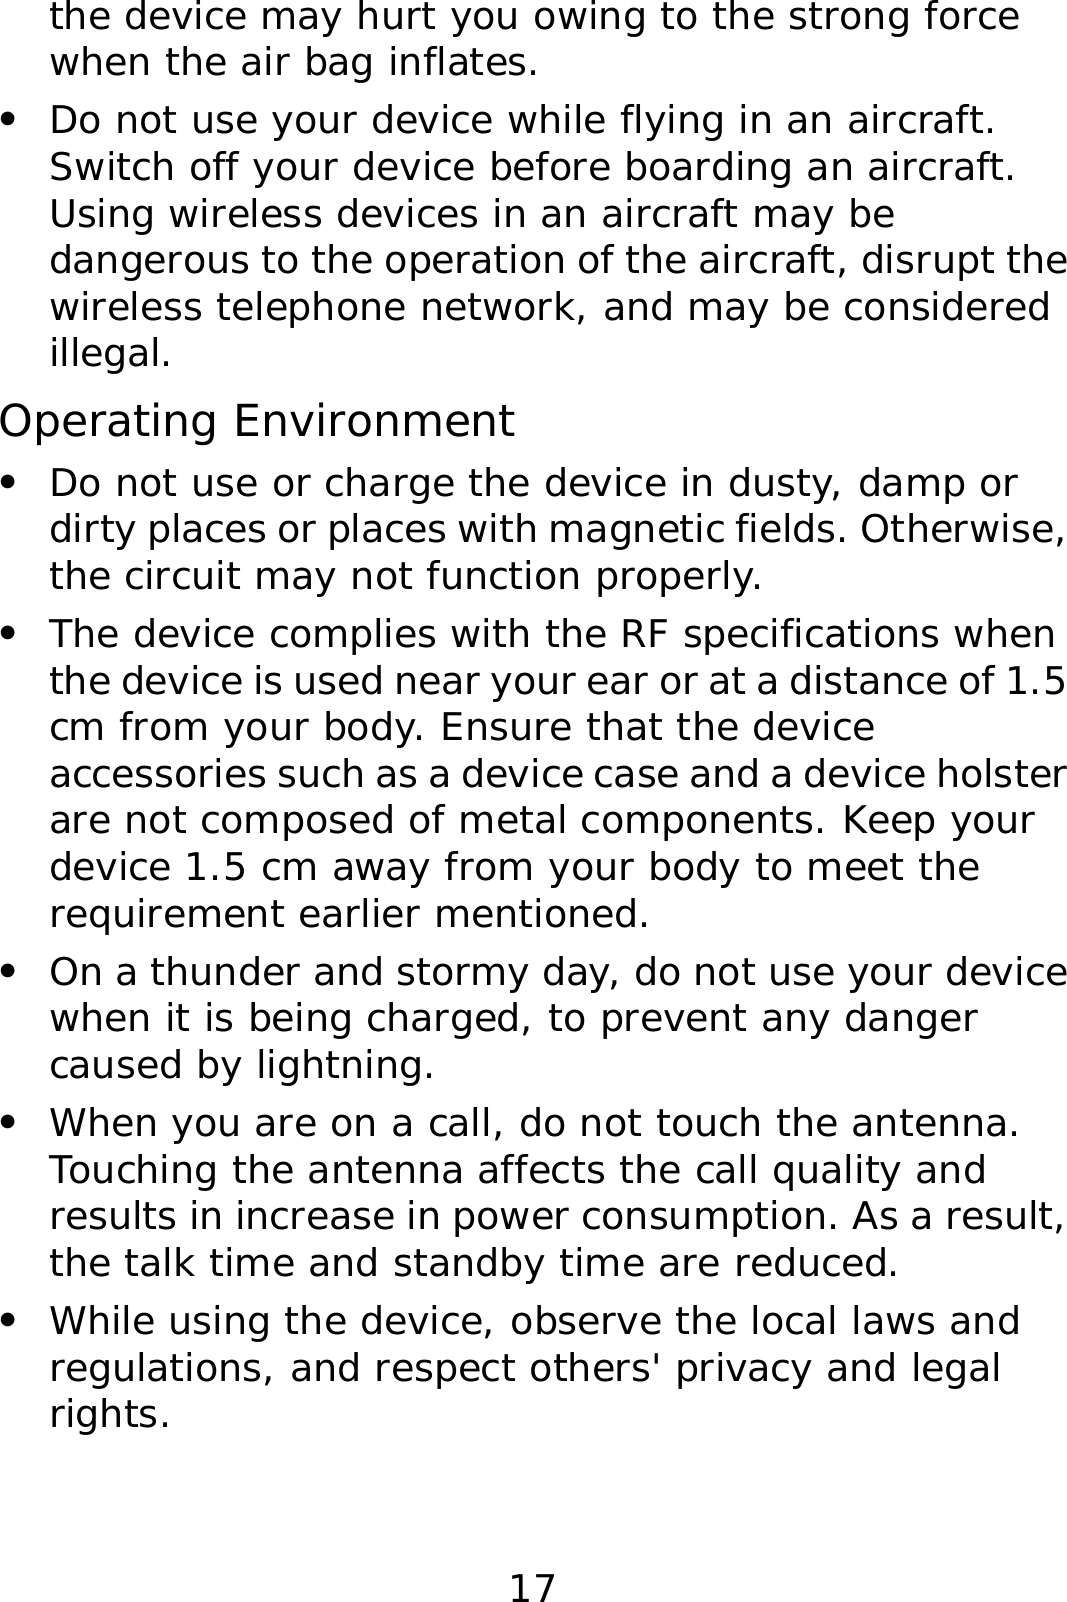 17 the device may hurt you owing to the strong force when the air bag inflates. z Do not use your device while flying in an aircraft. Switch off your device before boarding an aircraft. Using wireless devices in an aircraft may be dangerous to the operation of the aircraft, disrupt the wireless telephone network, and may be considered illegal.  Operating Environment z Do not use or charge the device in dusty, damp or dirty places or places with magnetic fields. Otherwise, the circuit may not function properly. z The device complies with the RF specifications when the device is used near your ear or at a distance of 1.5 cm from your body. Ensure that the device accessories such as a device case and a device holster are not composed of metal components. Keep your device 1.5 cm away from your body to meet the requirement earlier mentioned. z On a thunder and stormy day, do not use your device when it is being charged, to prevent any danger caused by lightning. z When you are on a call, do not touch the antenna. Touching the antenna affects the call quality and results in increase in power consumption. As a result, the talk time and standby time are reduced. z While using the device, observe the local laws and regulations, and respect others&apos; privacy and legal rights. 